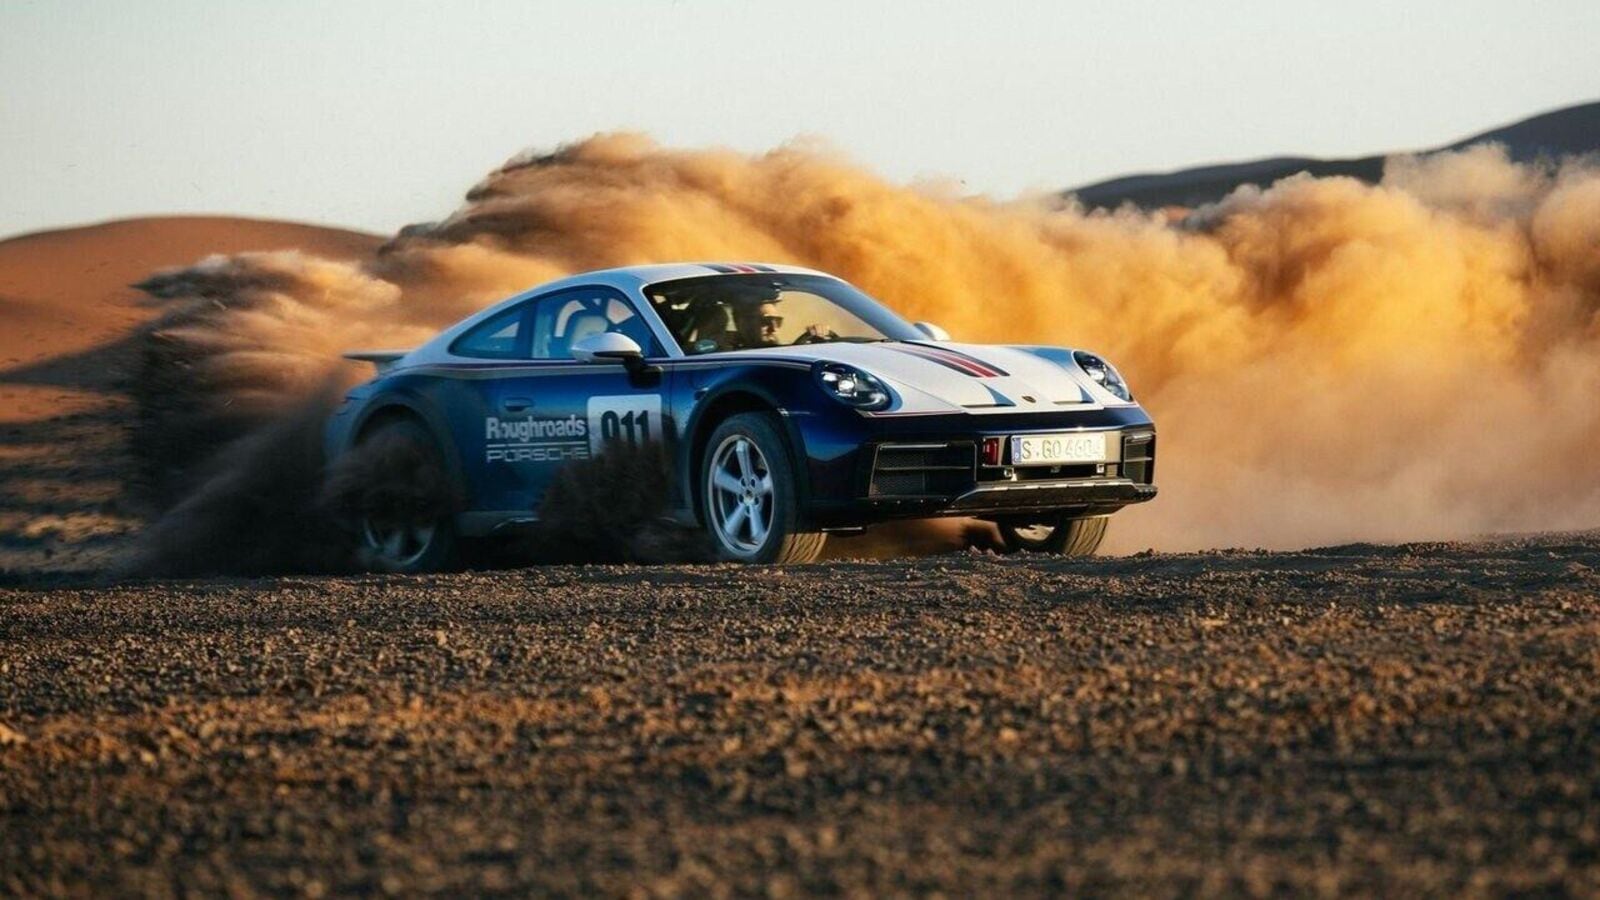 This Porsche 911 is inspired by Dakar Rally!